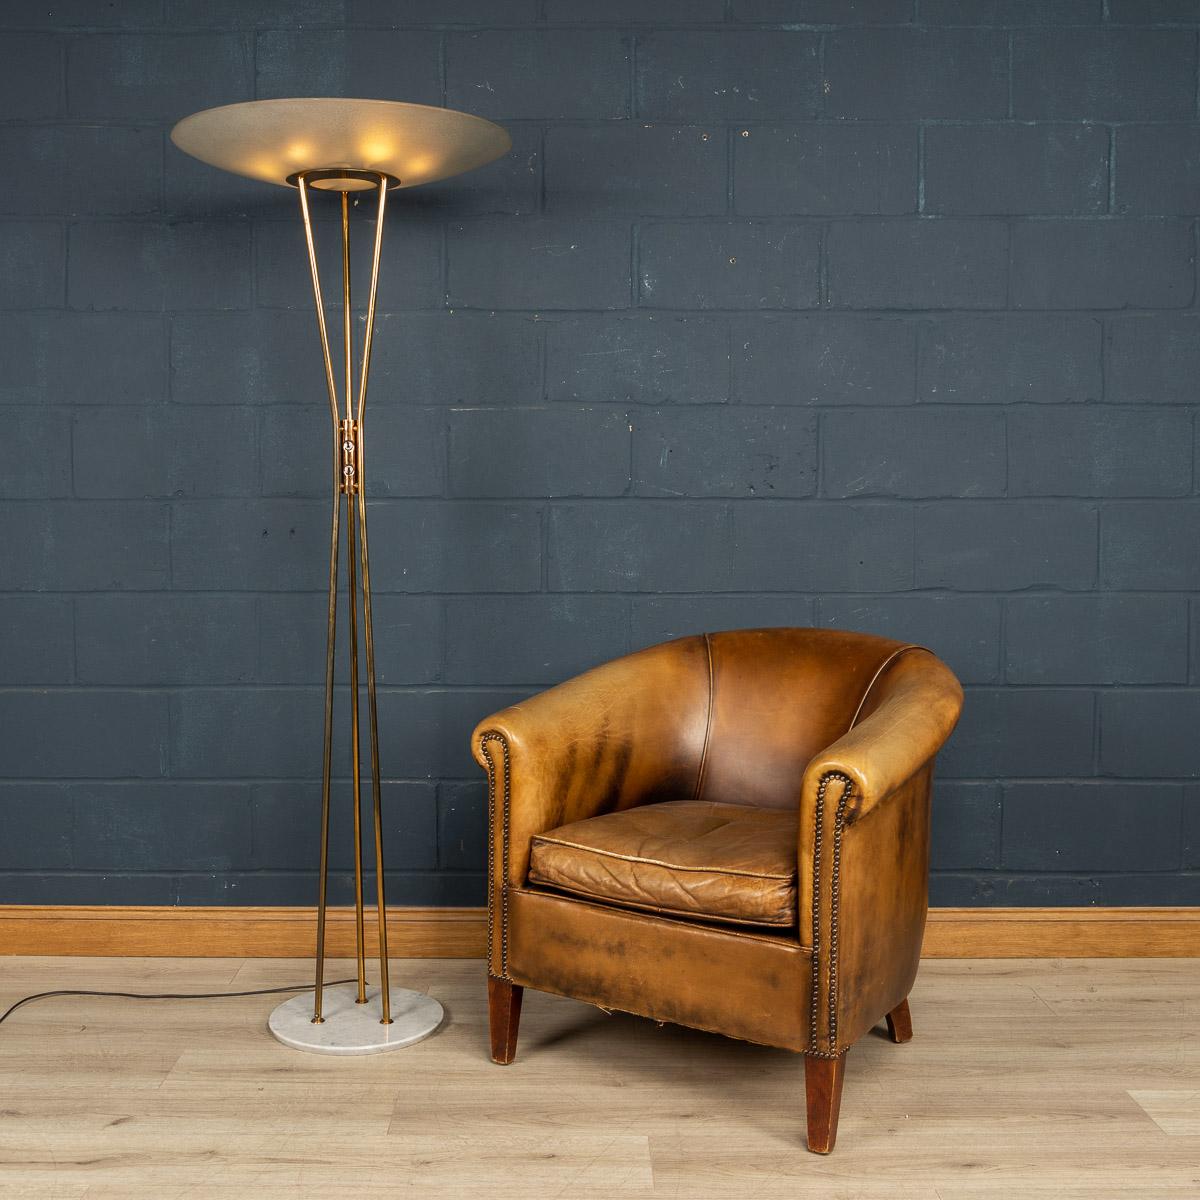 A stunning floor lamp by Gaetano Sciolari made by Stilnovo of Italy around the 1960s. Sciolari was at the forefront of design in that period. It is hard to overstate how futuristic his designs looked at the time and how influential his designs were.